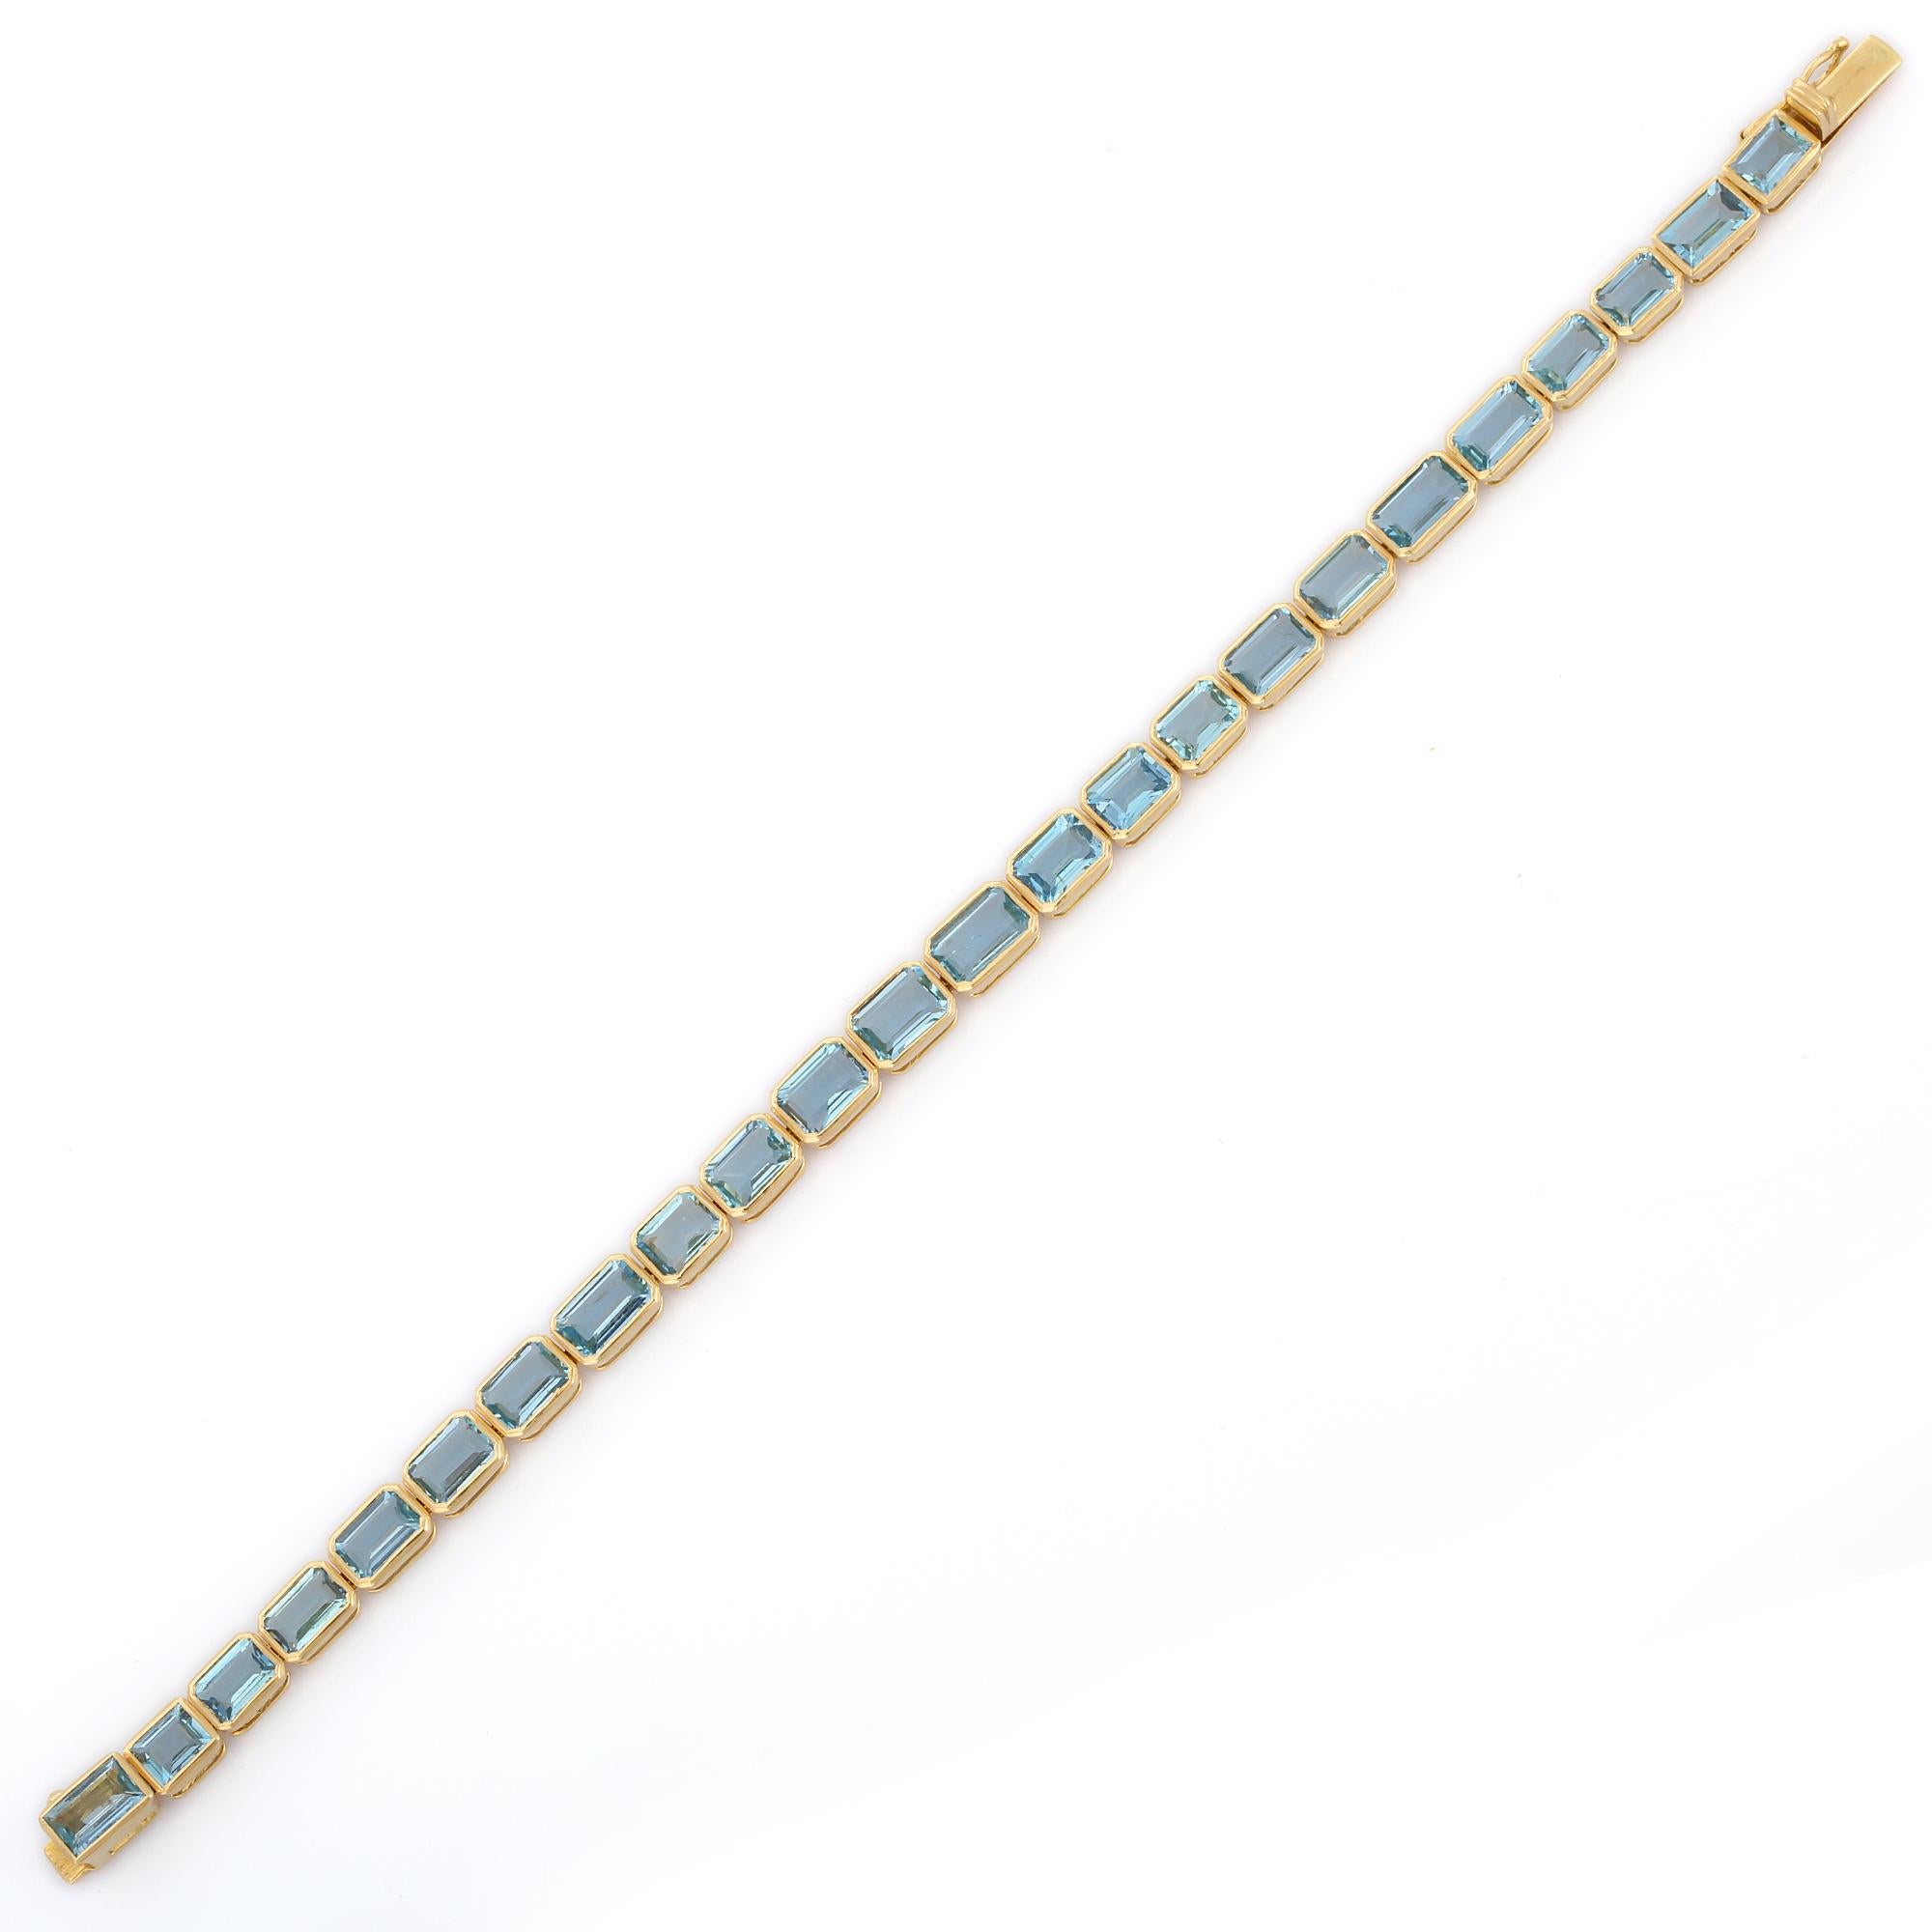 12.4 Carat Aquamarine Tennis Bracelet in 18K Yellow Gold In New Condition For Sale In Houston, TX